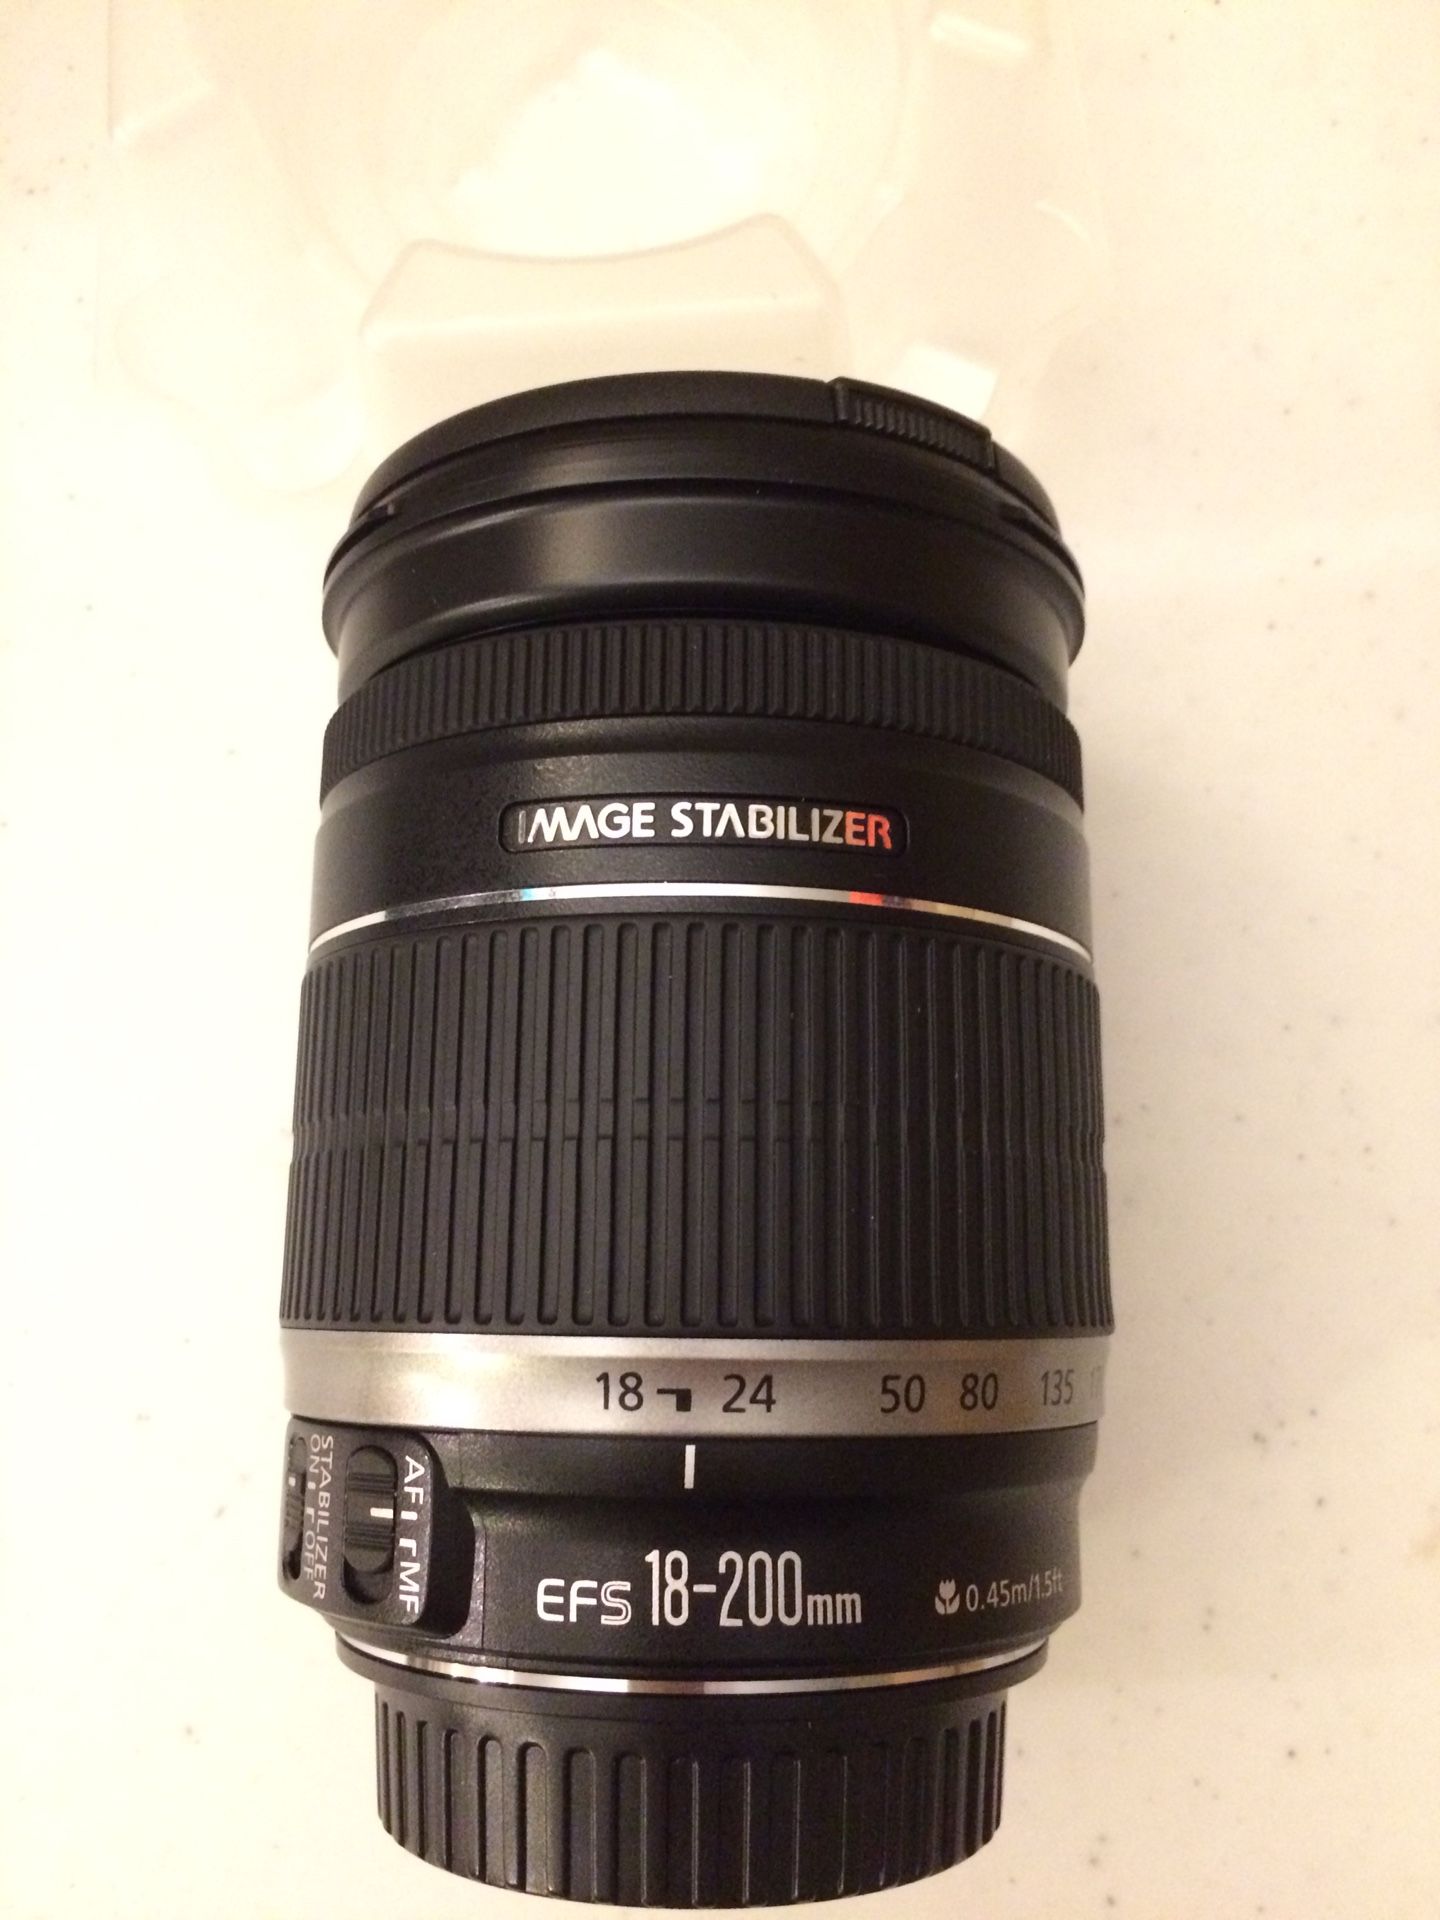 Canon EF-S 18-200mm f/3.5-5.6 IS Image Stabilizer Lens photography camera